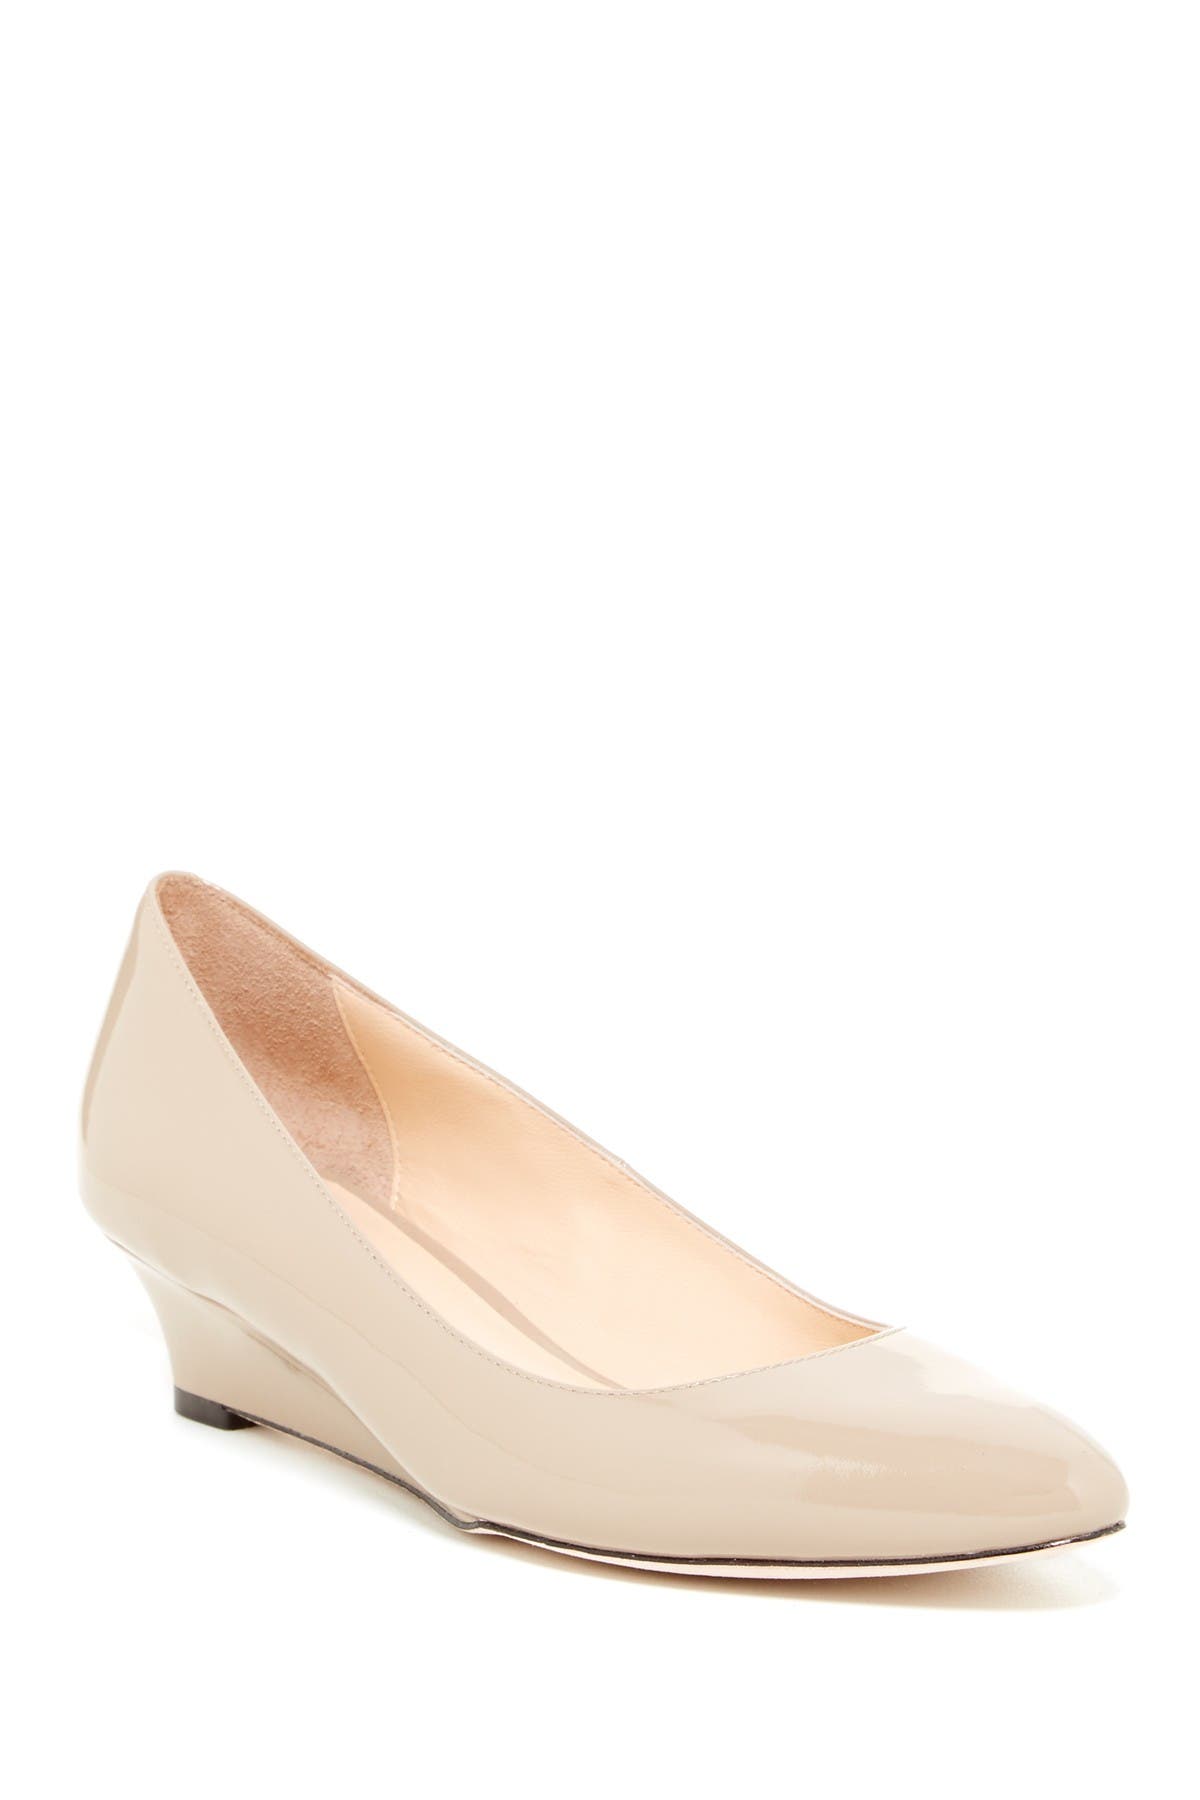 cole haan bethany pump